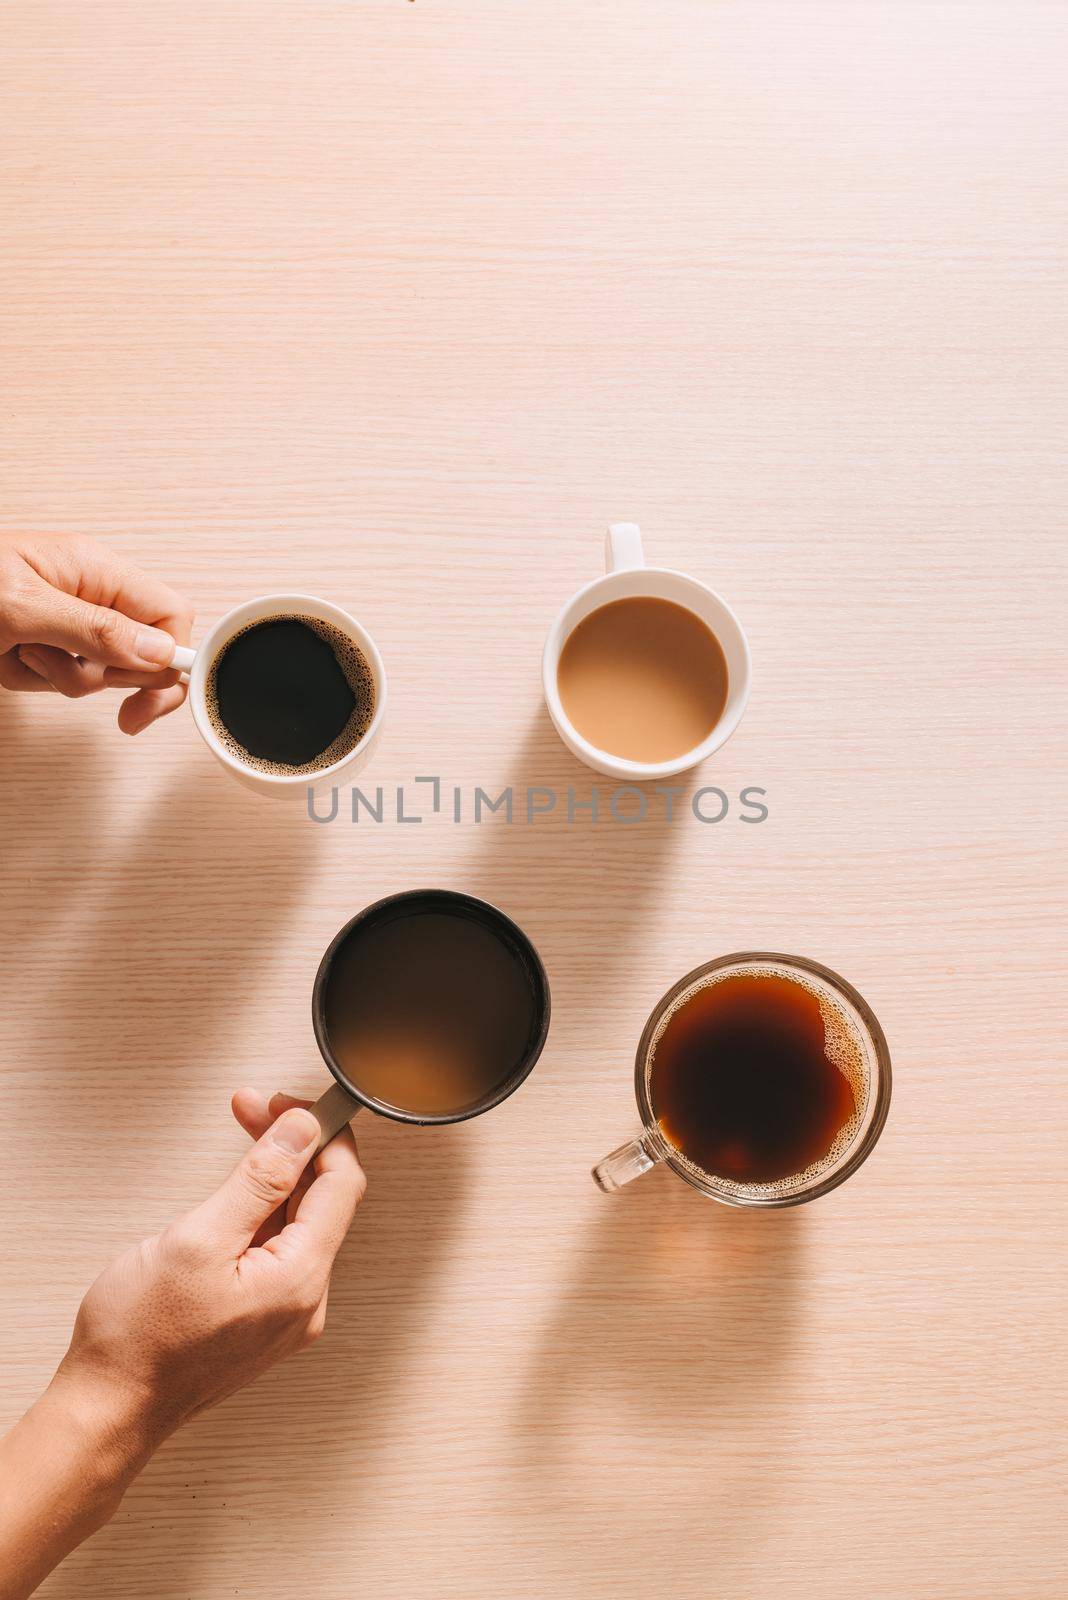 Hands holding cups of coffee on wood background by makidotvn